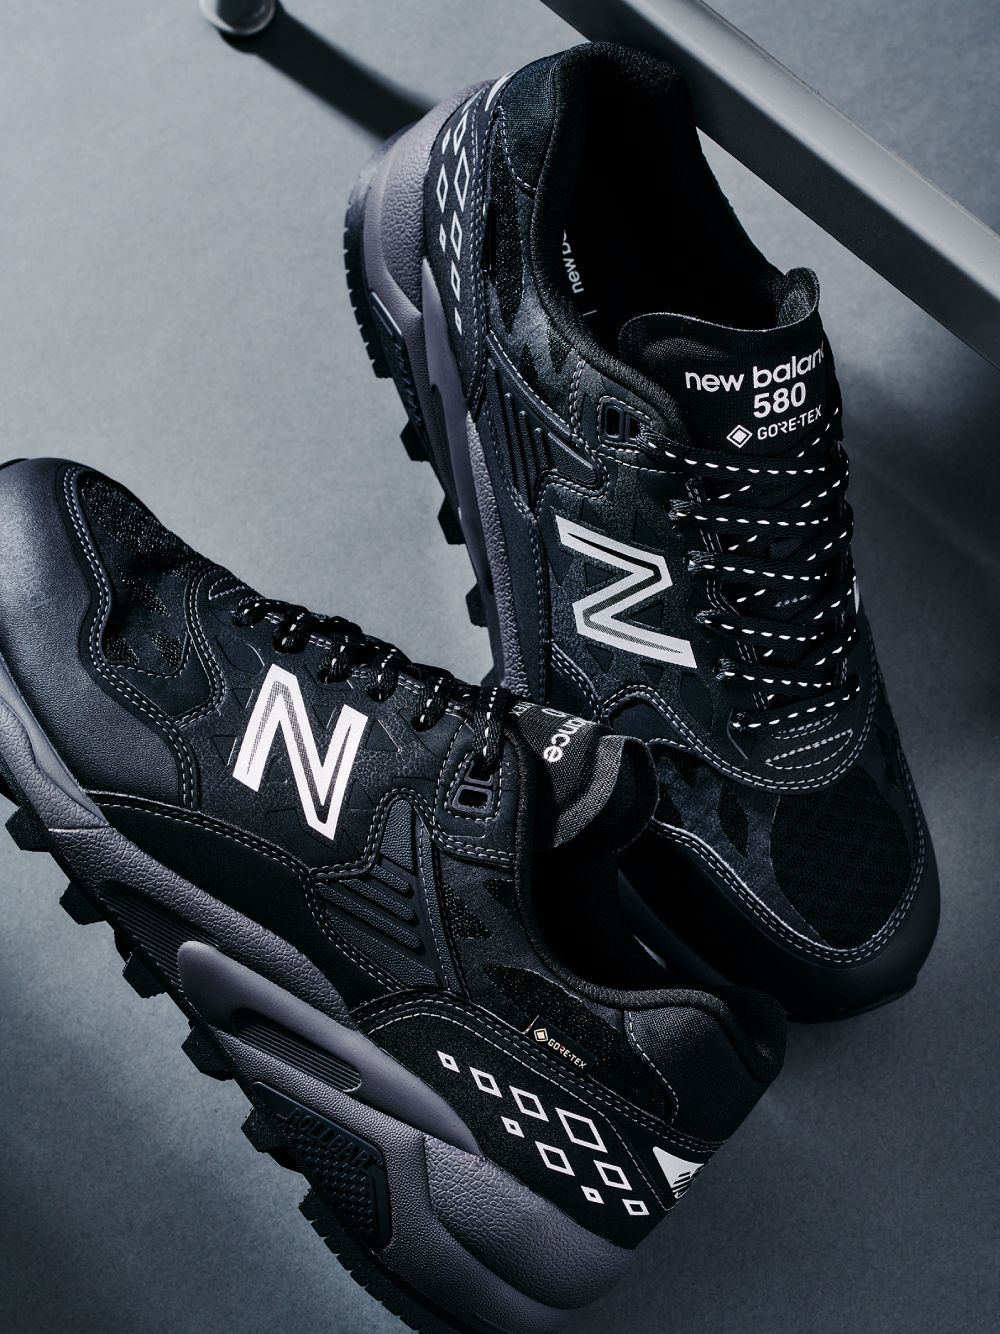 New Balance 580 GTX born from Tokyo street culture Special ...